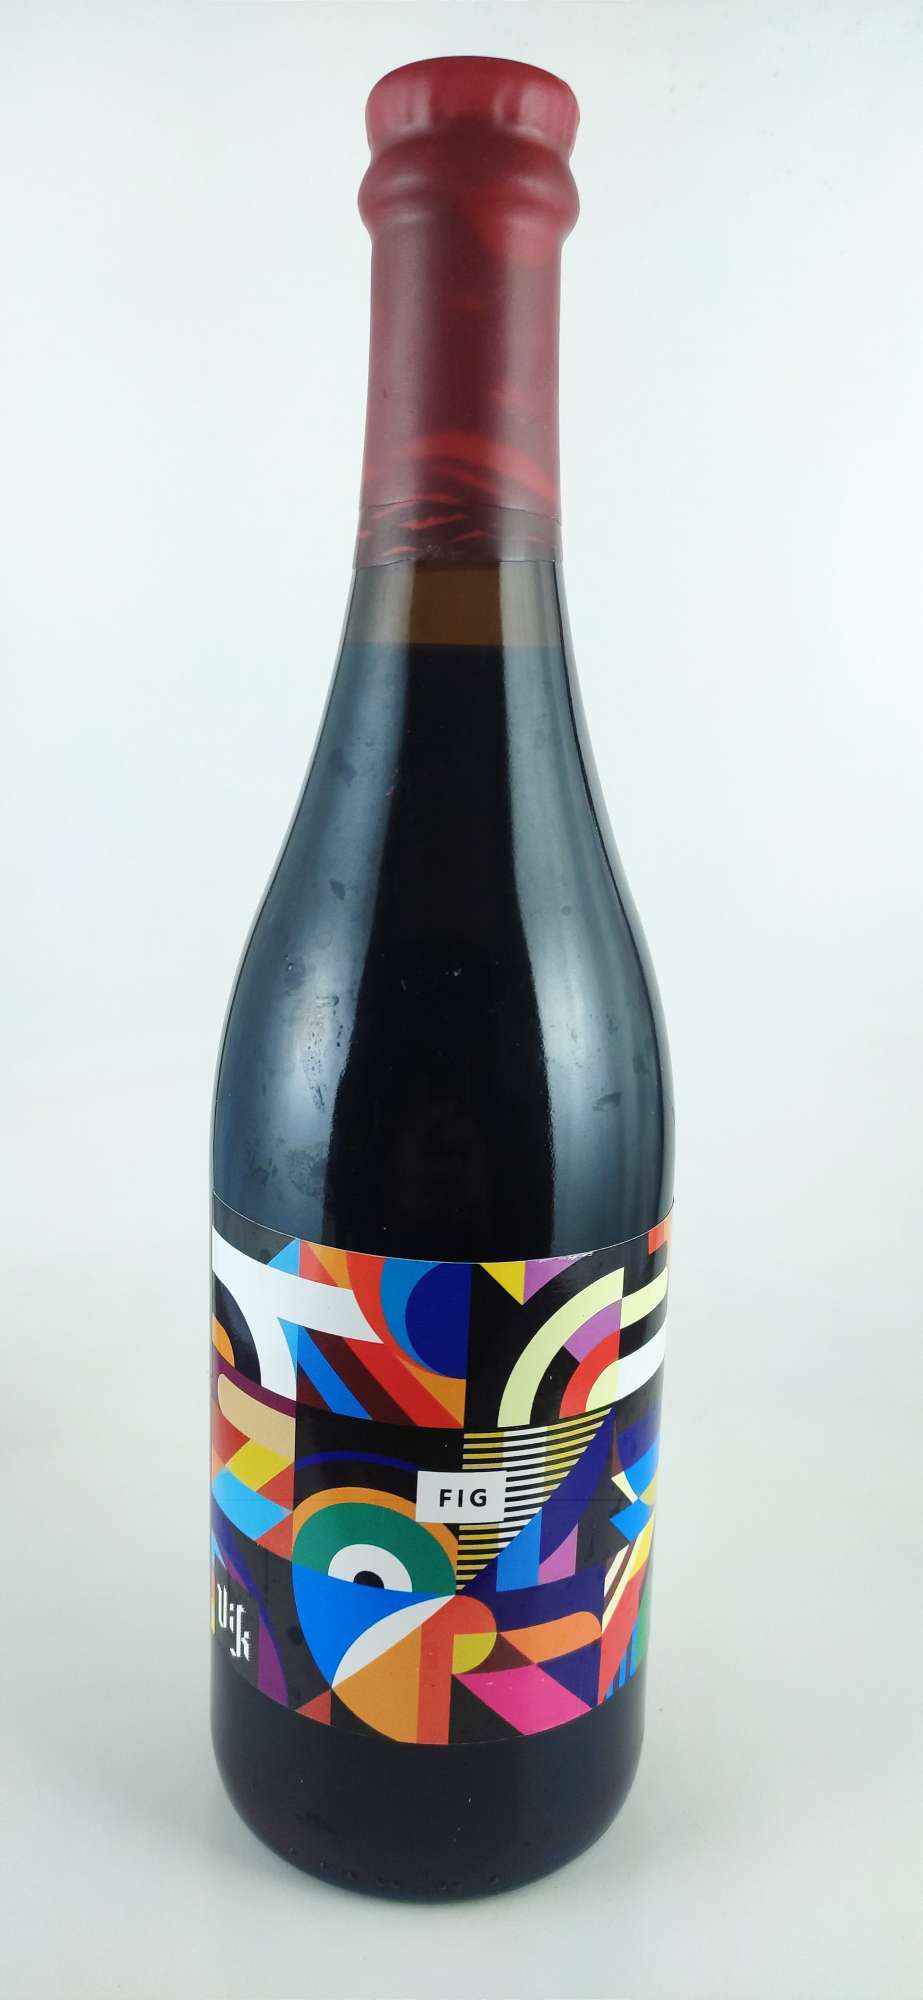 Vik Black Russian Imperial Stout FIG 20°